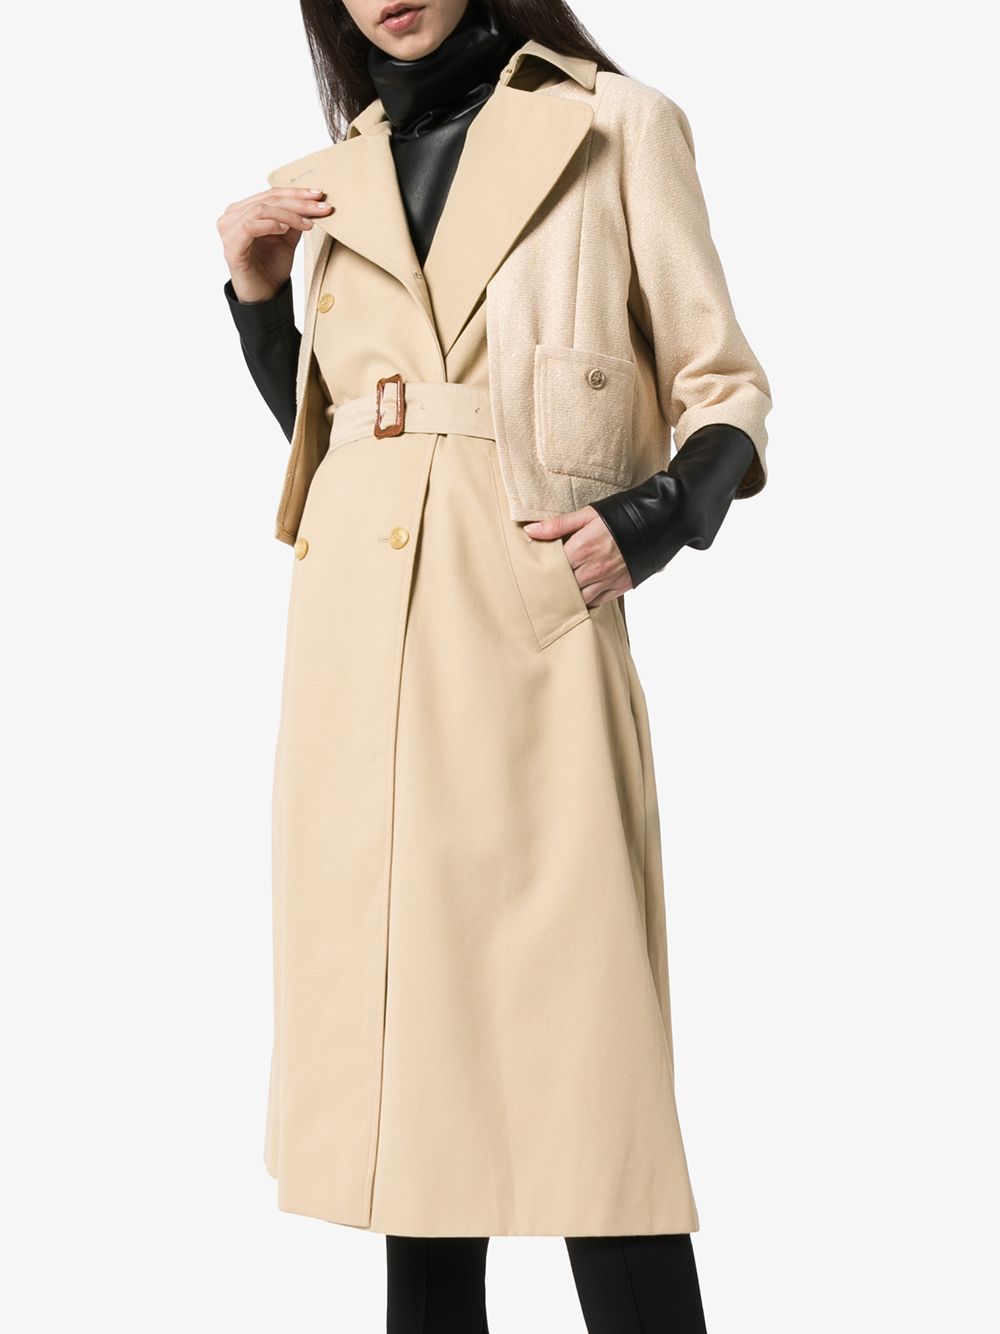 Tiger In The Rain Hybrid layer-look Trench Coat - Farfetch